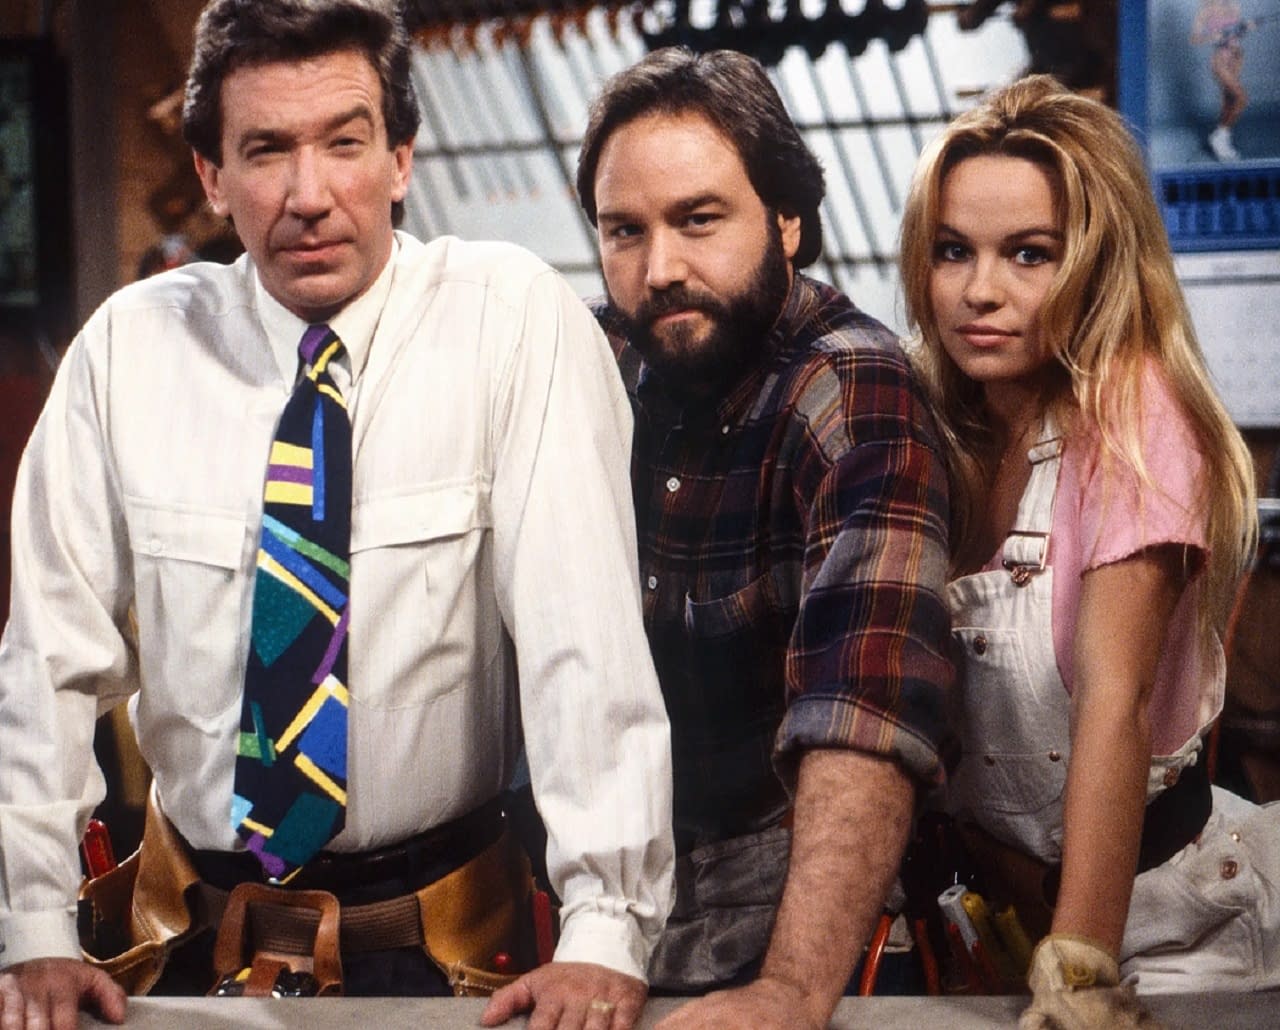 Home Improvement: Pamela Anderson Stands By Tim Allen Accusation